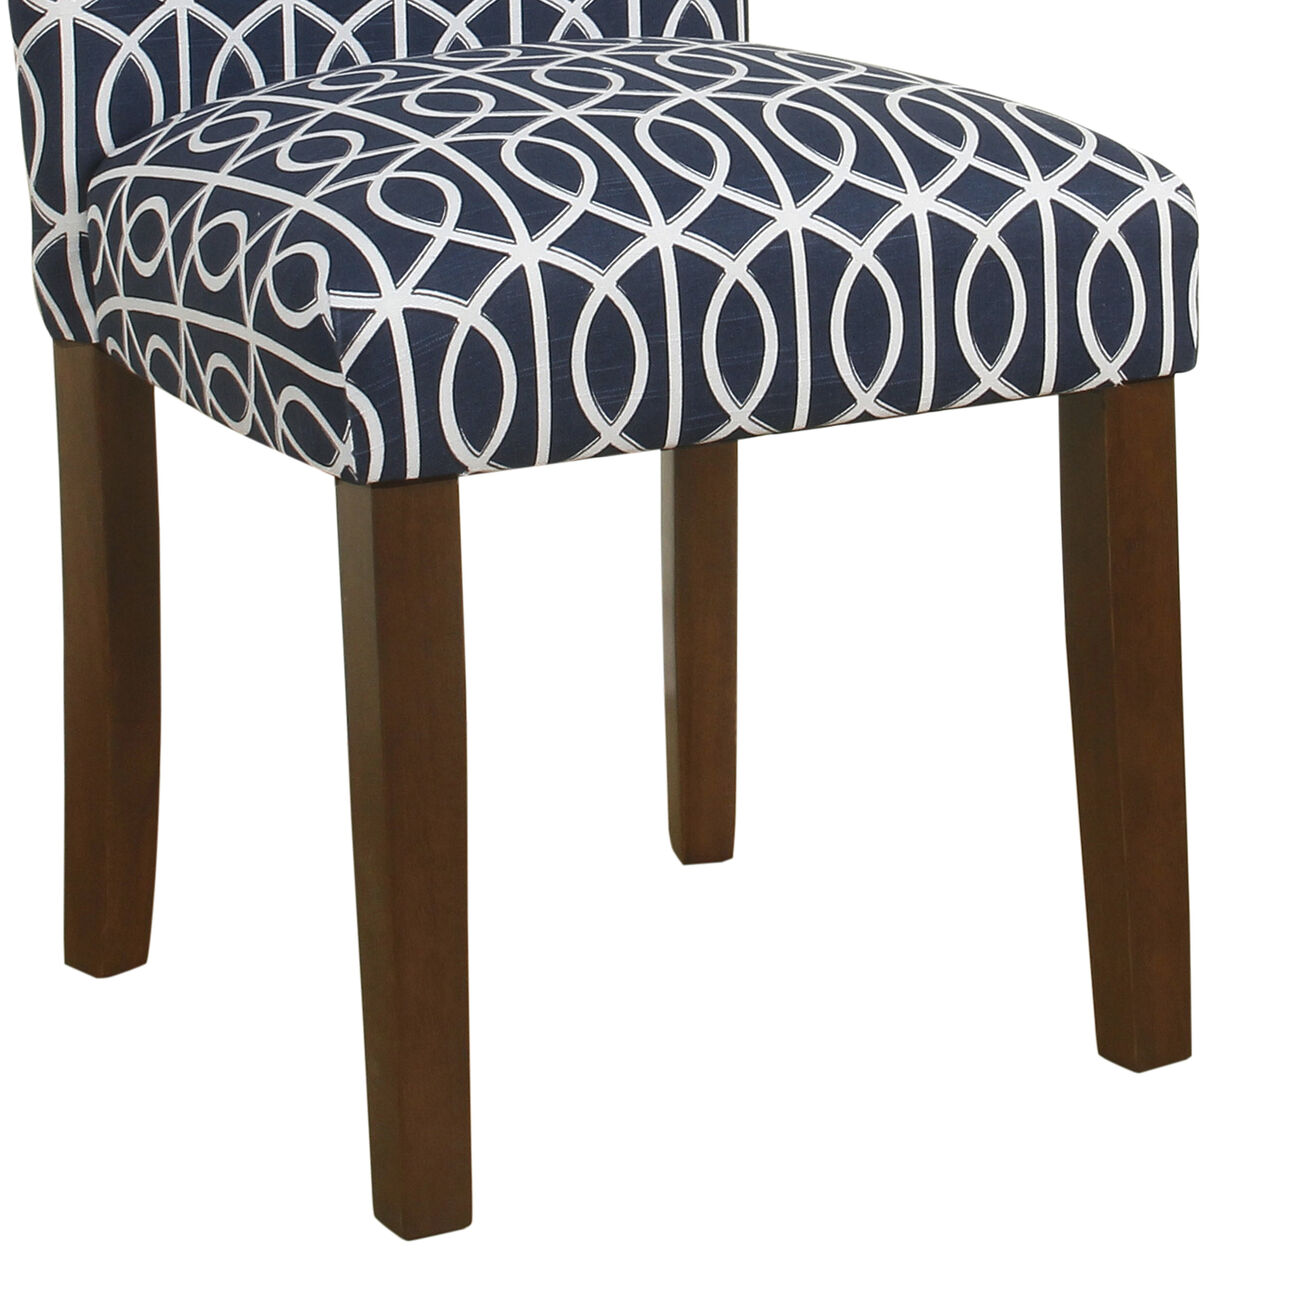 Trellis Patterned Fabric Upholstered Parsons Chair with Wooden Legs, Blue and White, Set of Two